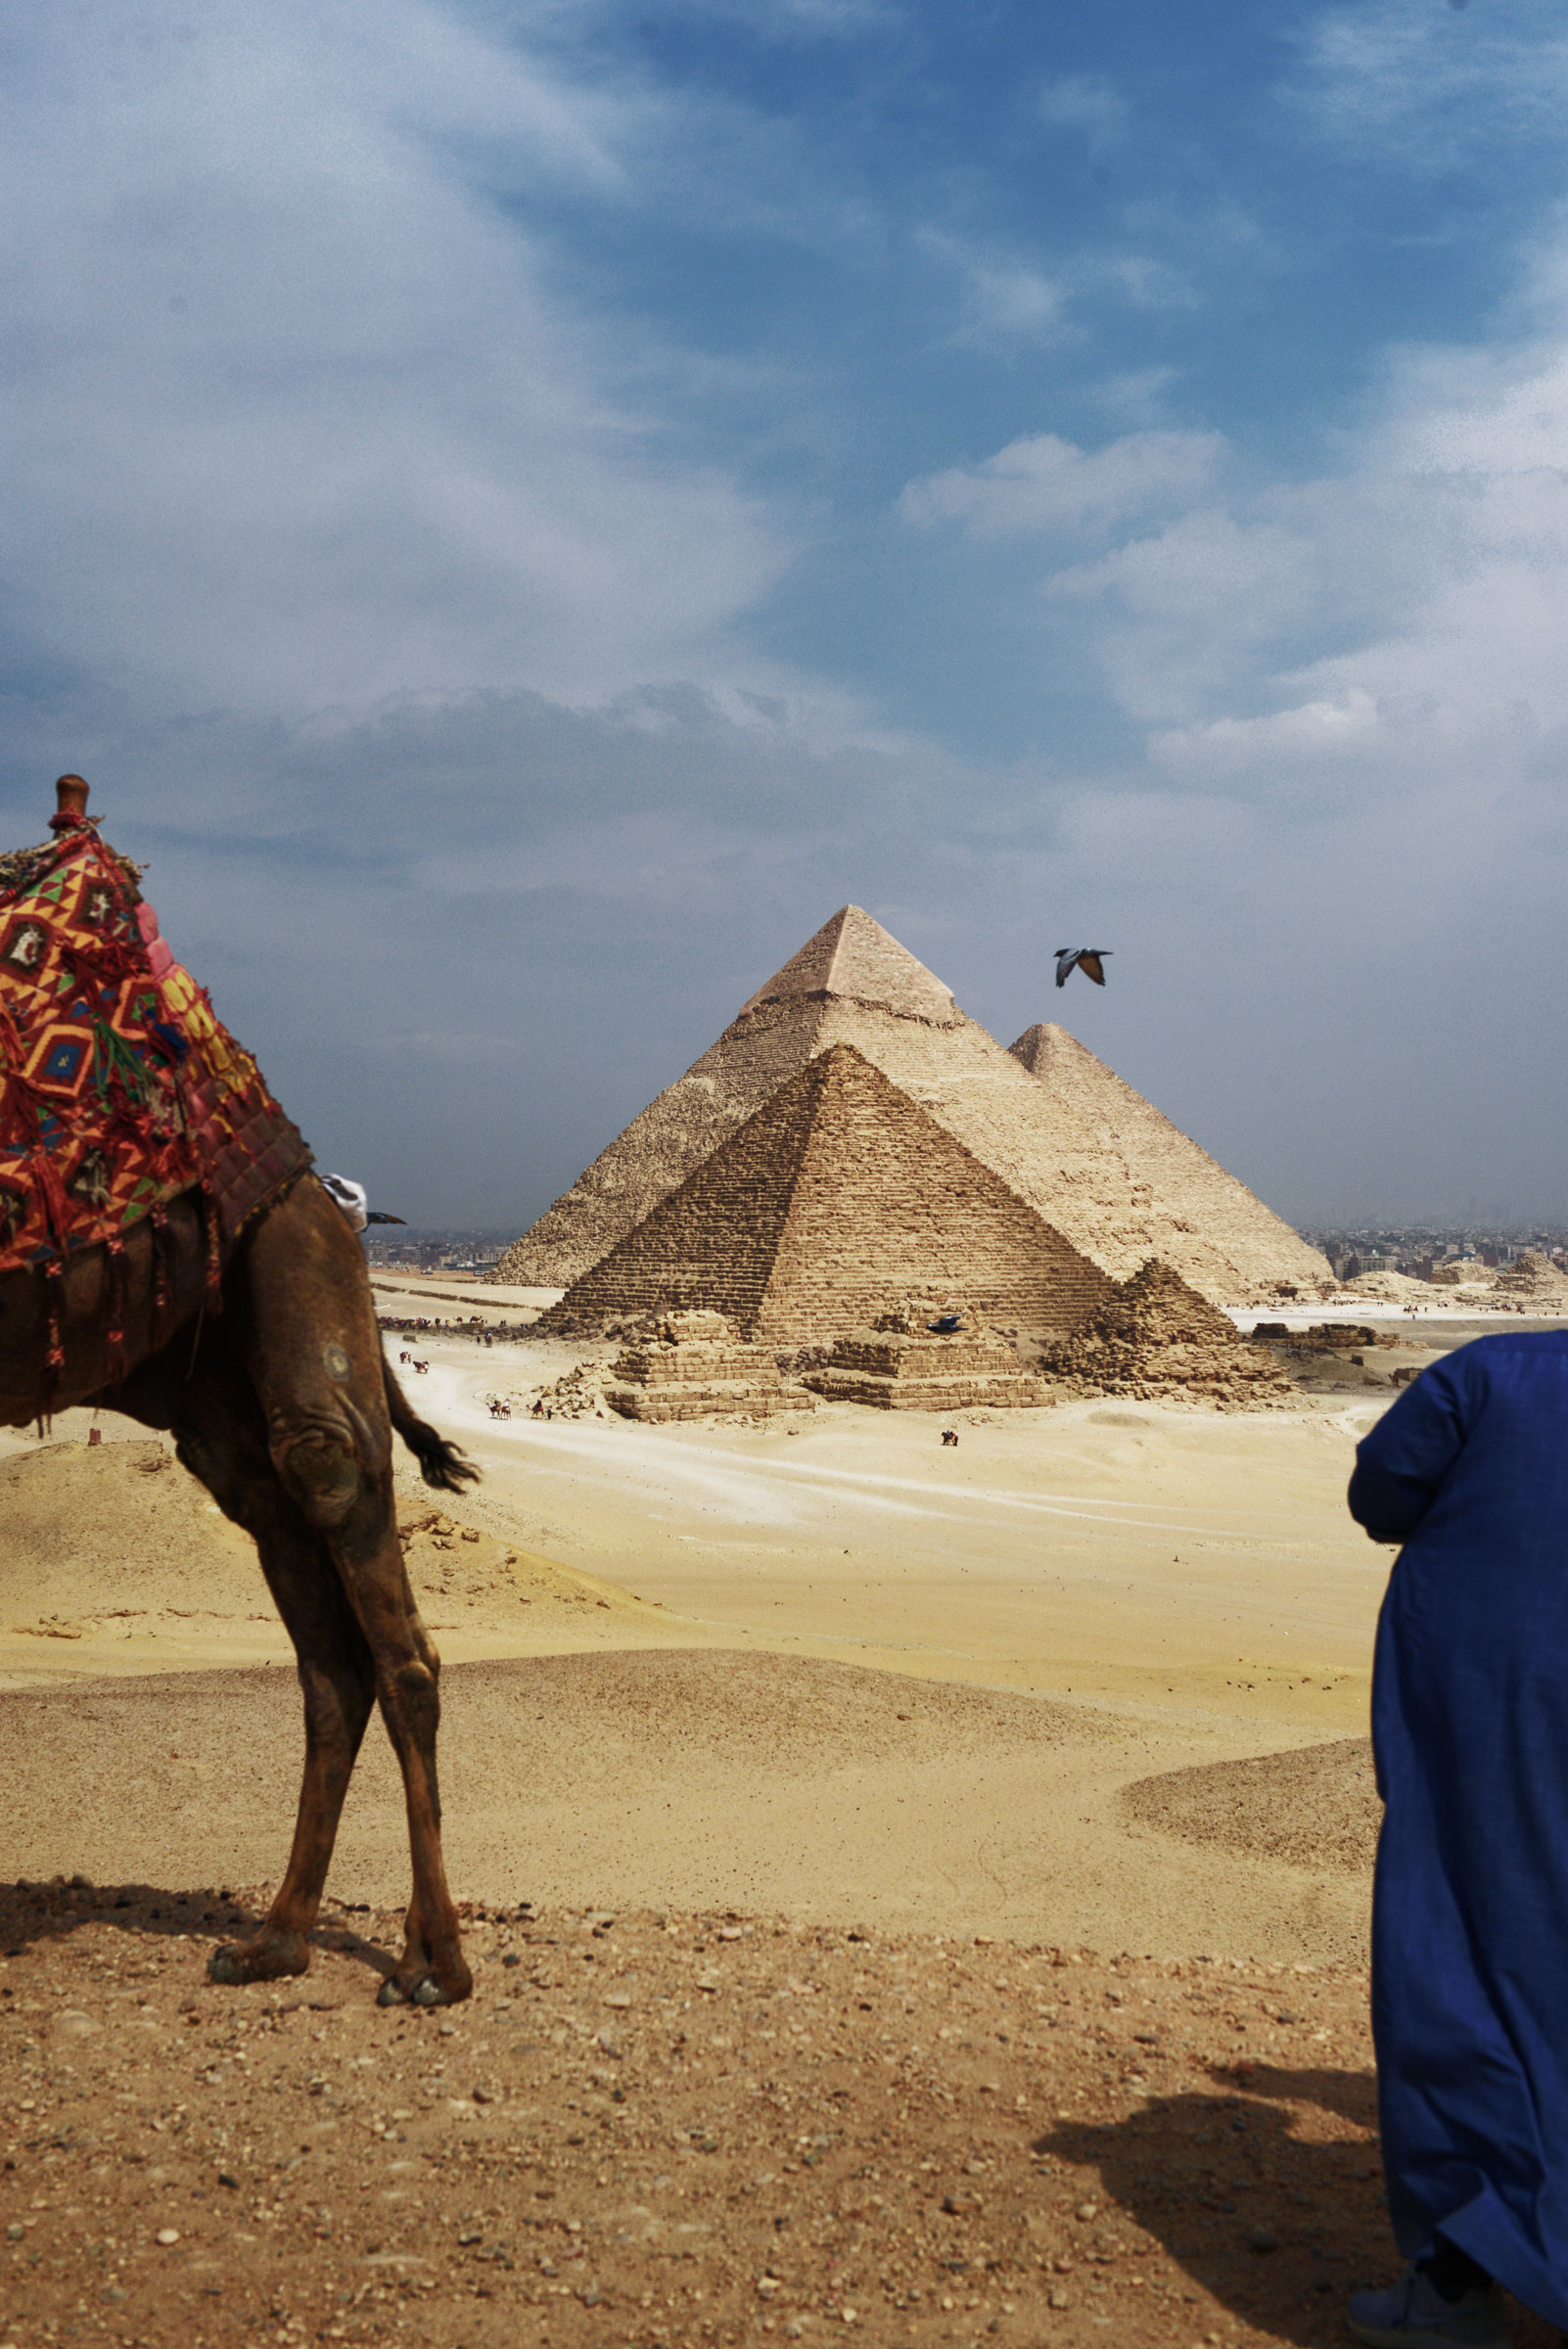 The Giza Pyramids, Egypt, with a camel and person in the foreground